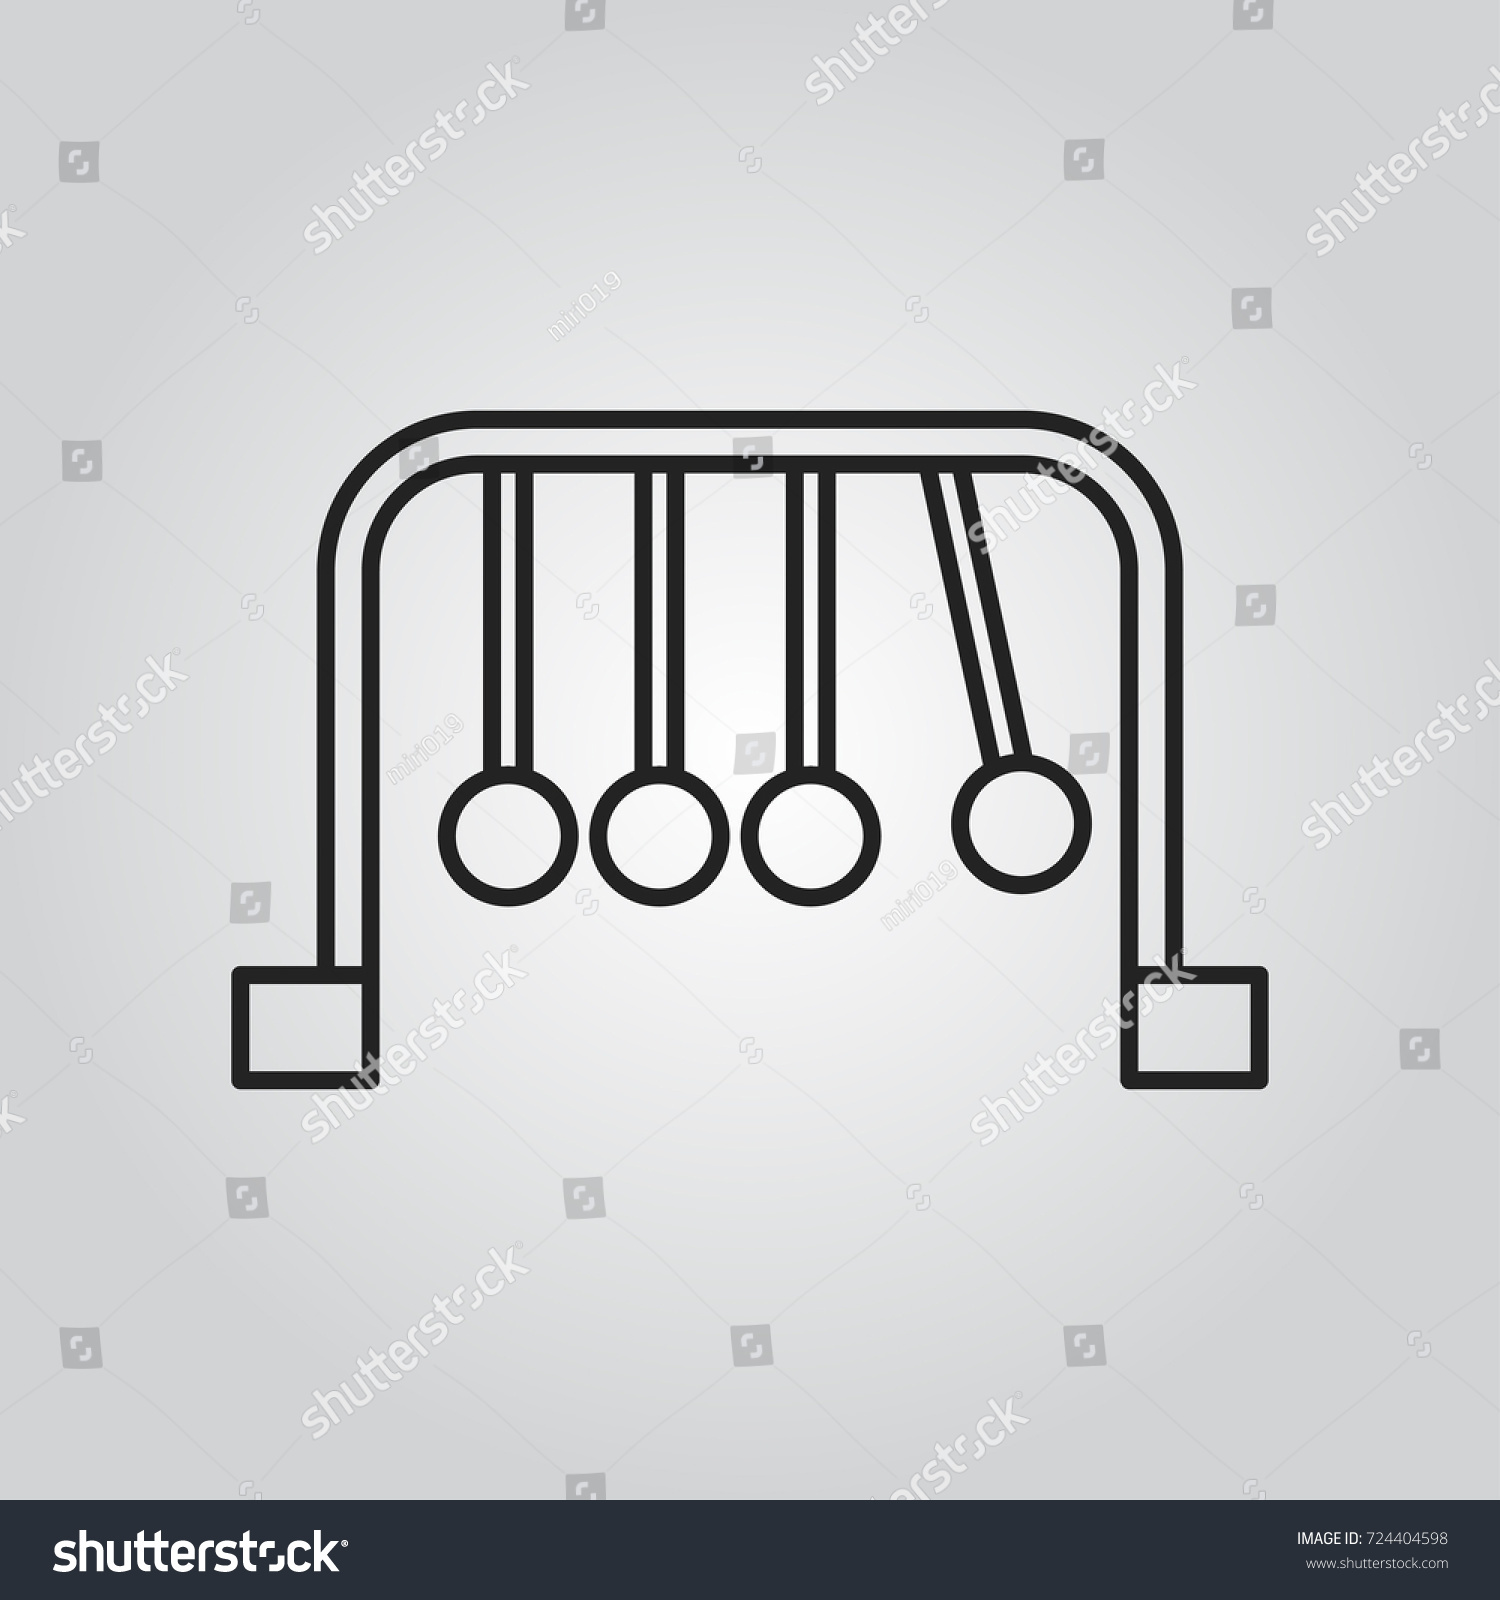 Newtons Cradle Icon Royalty Free Stock Vector 724404598 1293